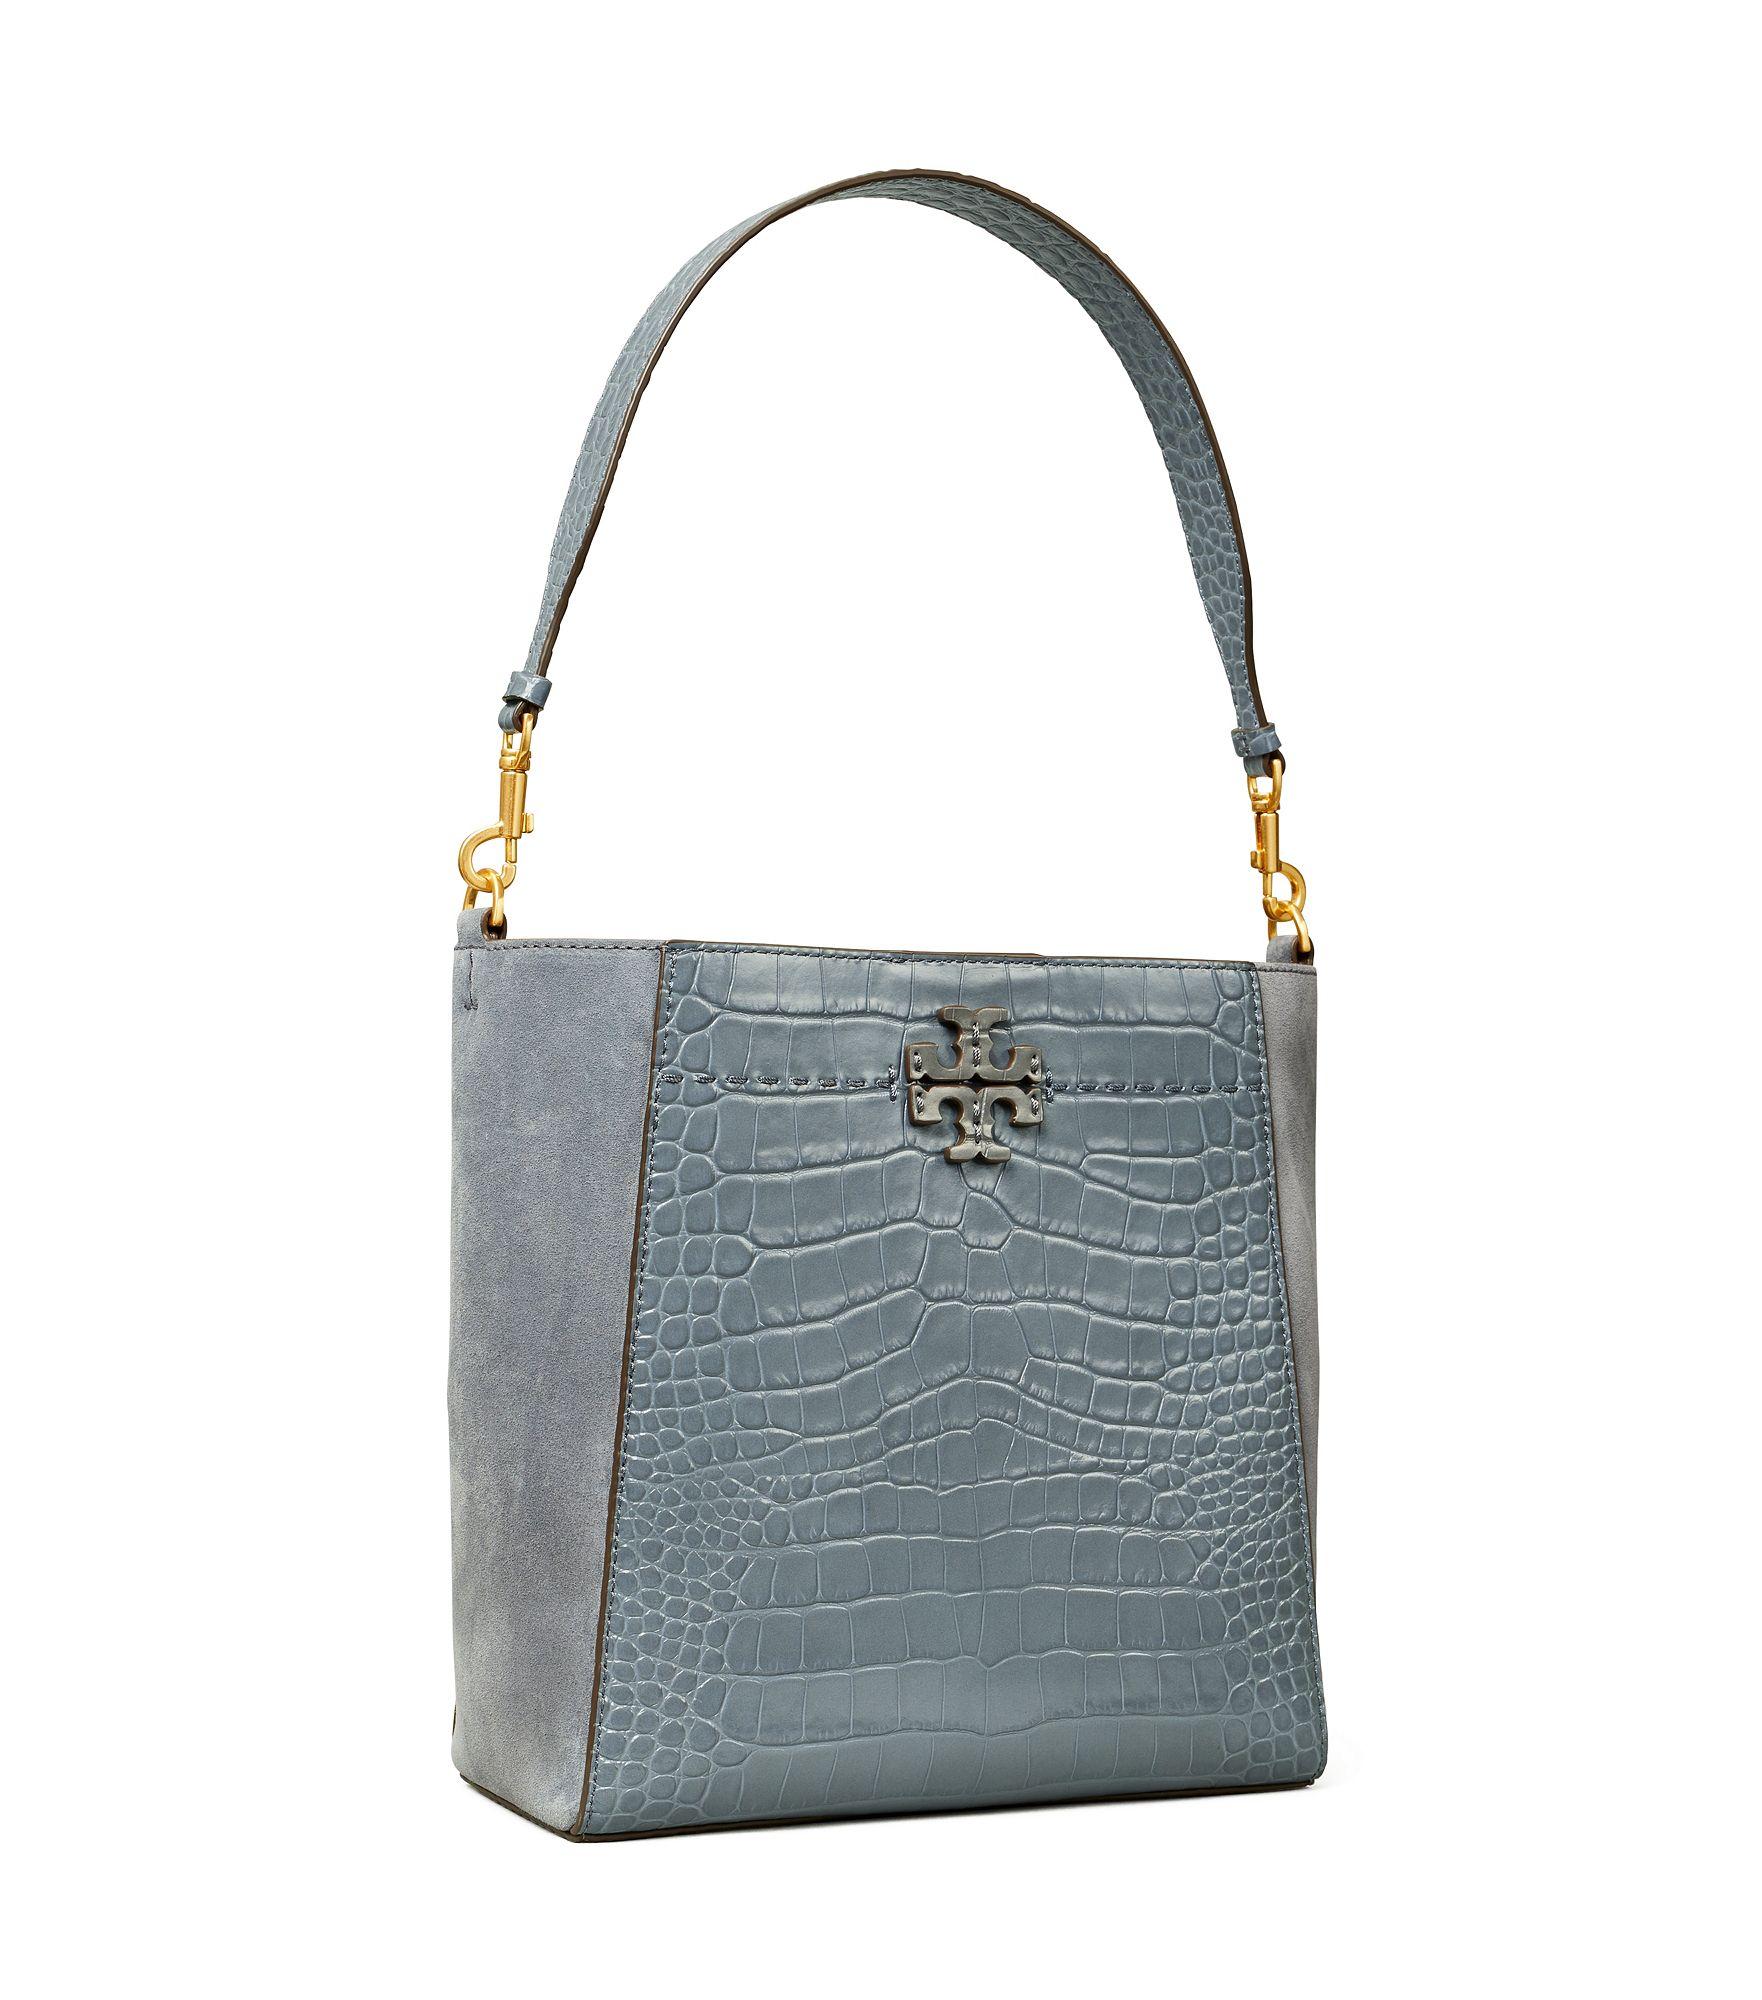 Tory Burch Mcgraw Small Croc-embossed Leather & Suede Bucket Bag